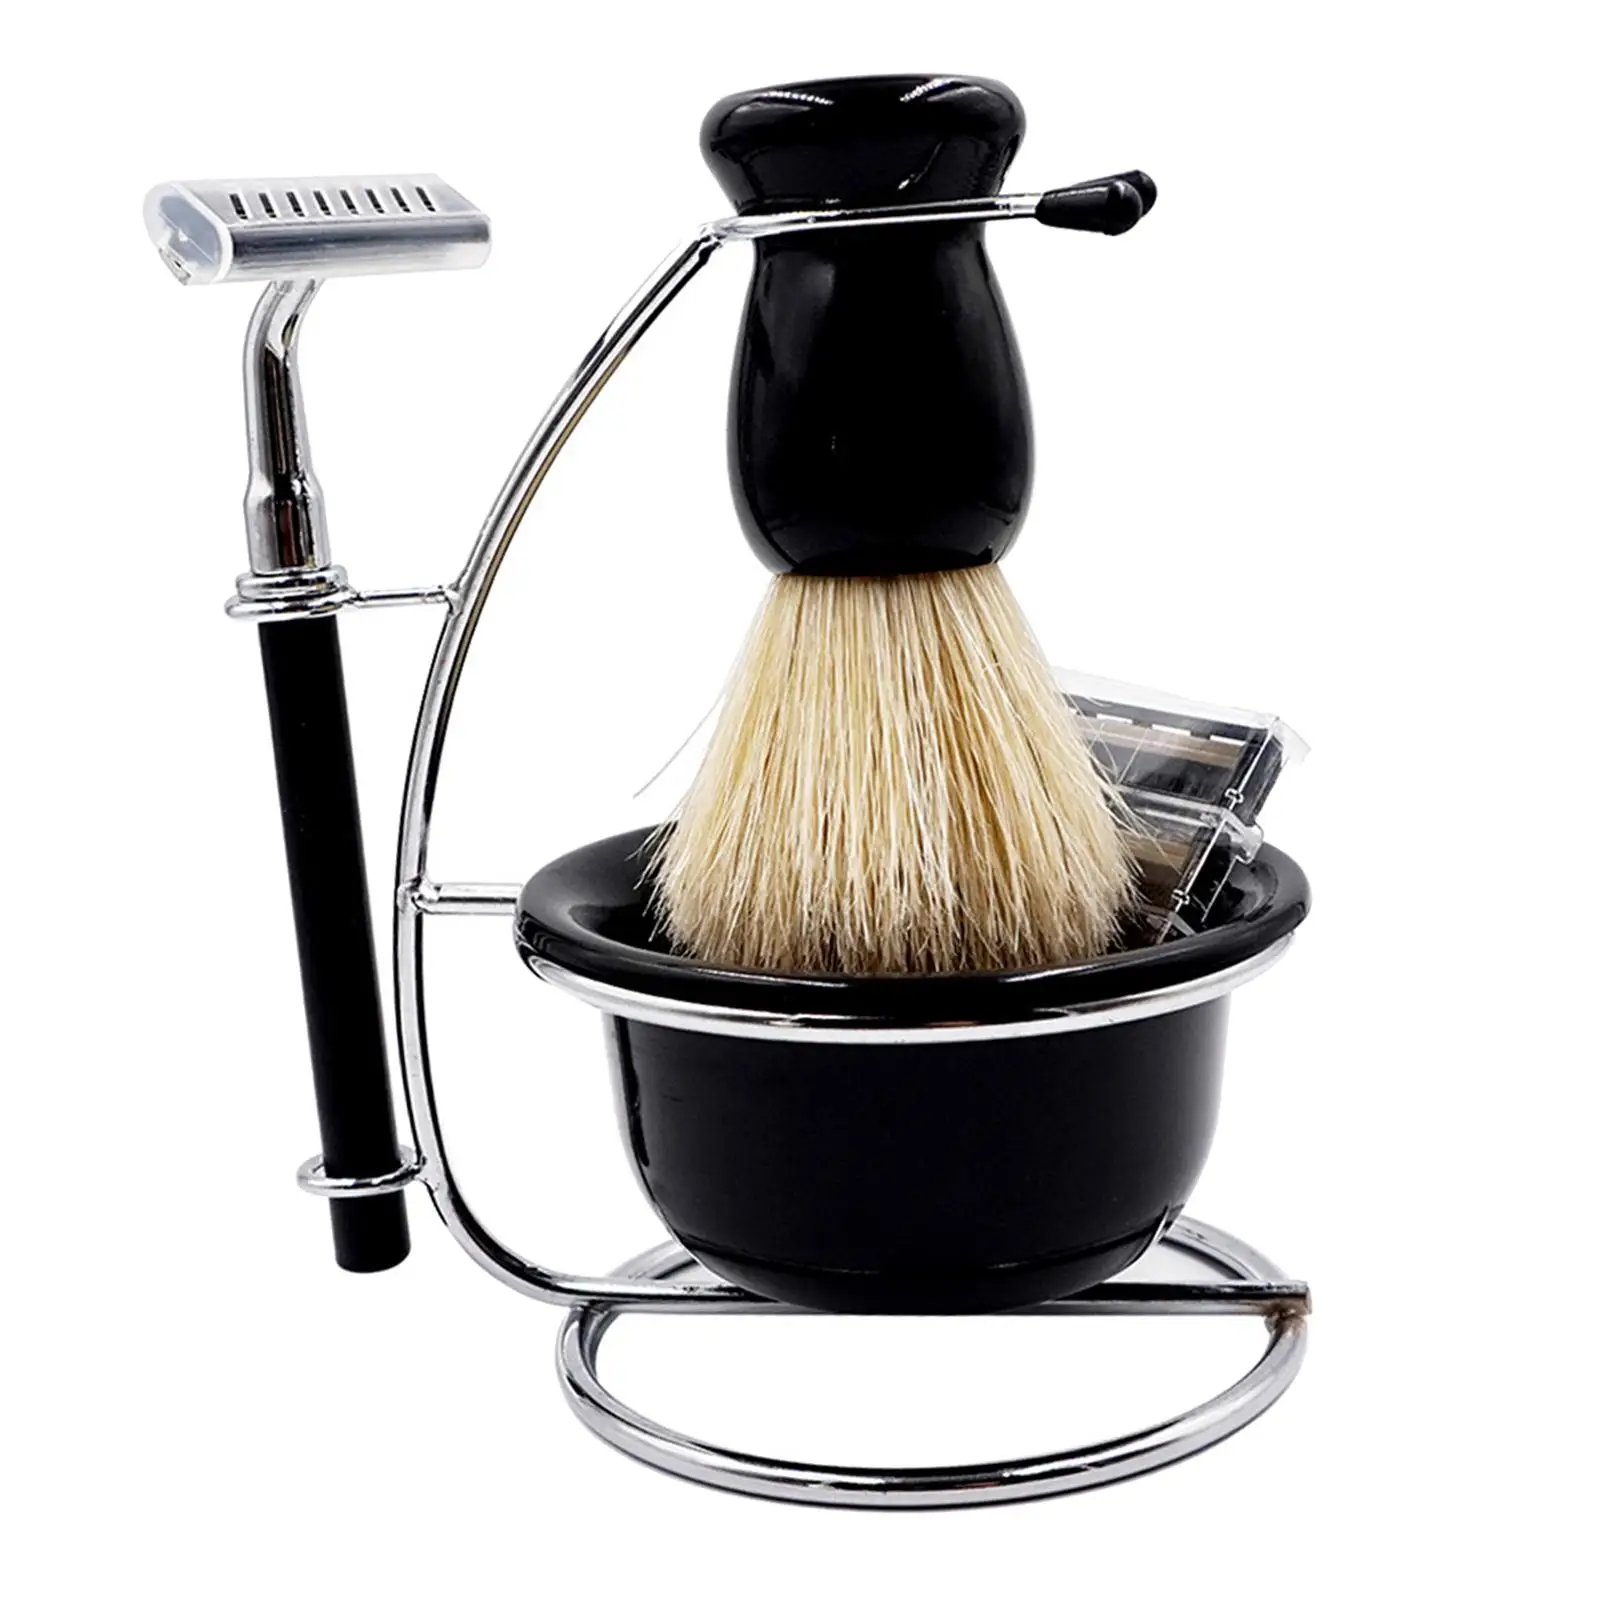 Travel Shaving Kit for Men Manual Stand Brush Bowl Set Weighted Bottom Accessory Portable Stainess Steel Holder Sturdy